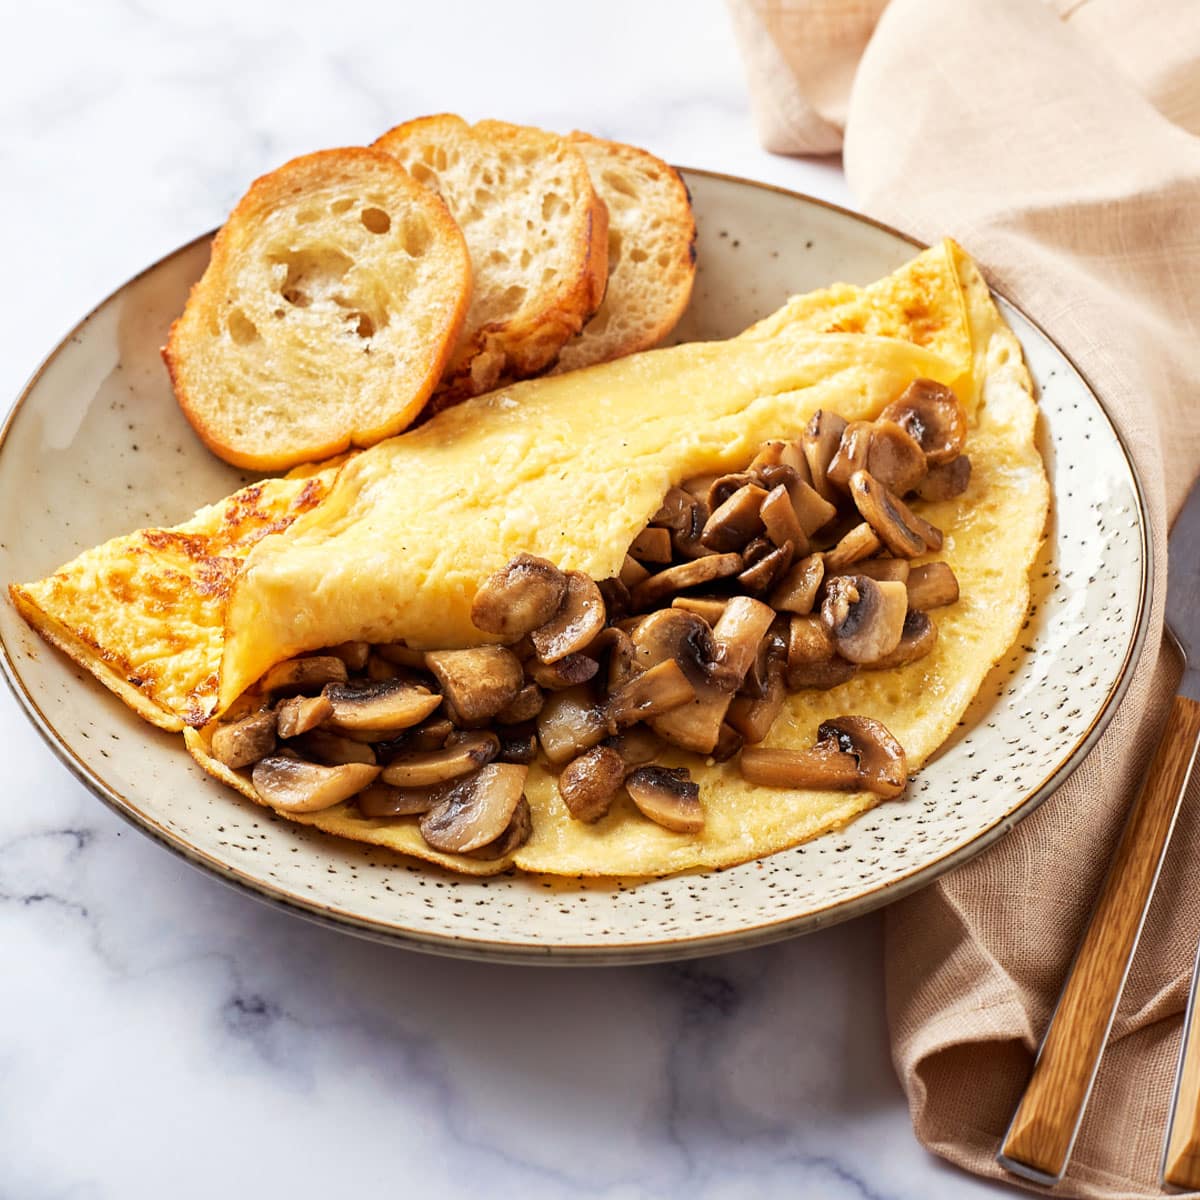 The first step towards making an omelet is to make a few basic adjustments. Rules aren't set in stone. How you cook an omelet doesn't matter: it's your choice! But I'll give you some tips that might help.